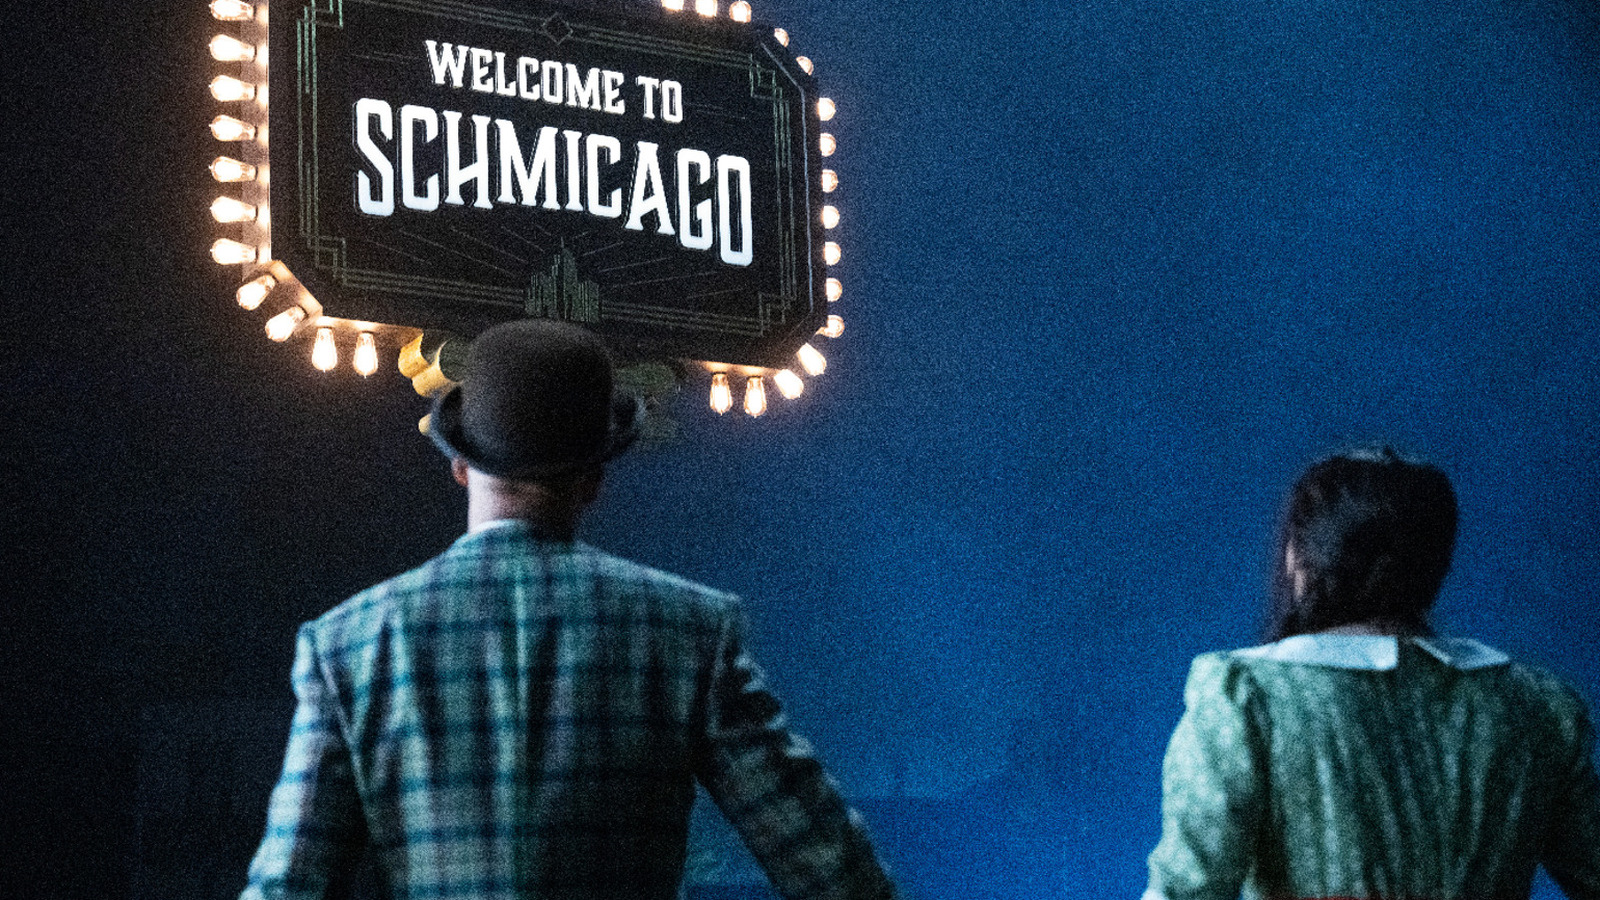 Schmigadoon season 2 review: A delightful return to form for the musical comedy series